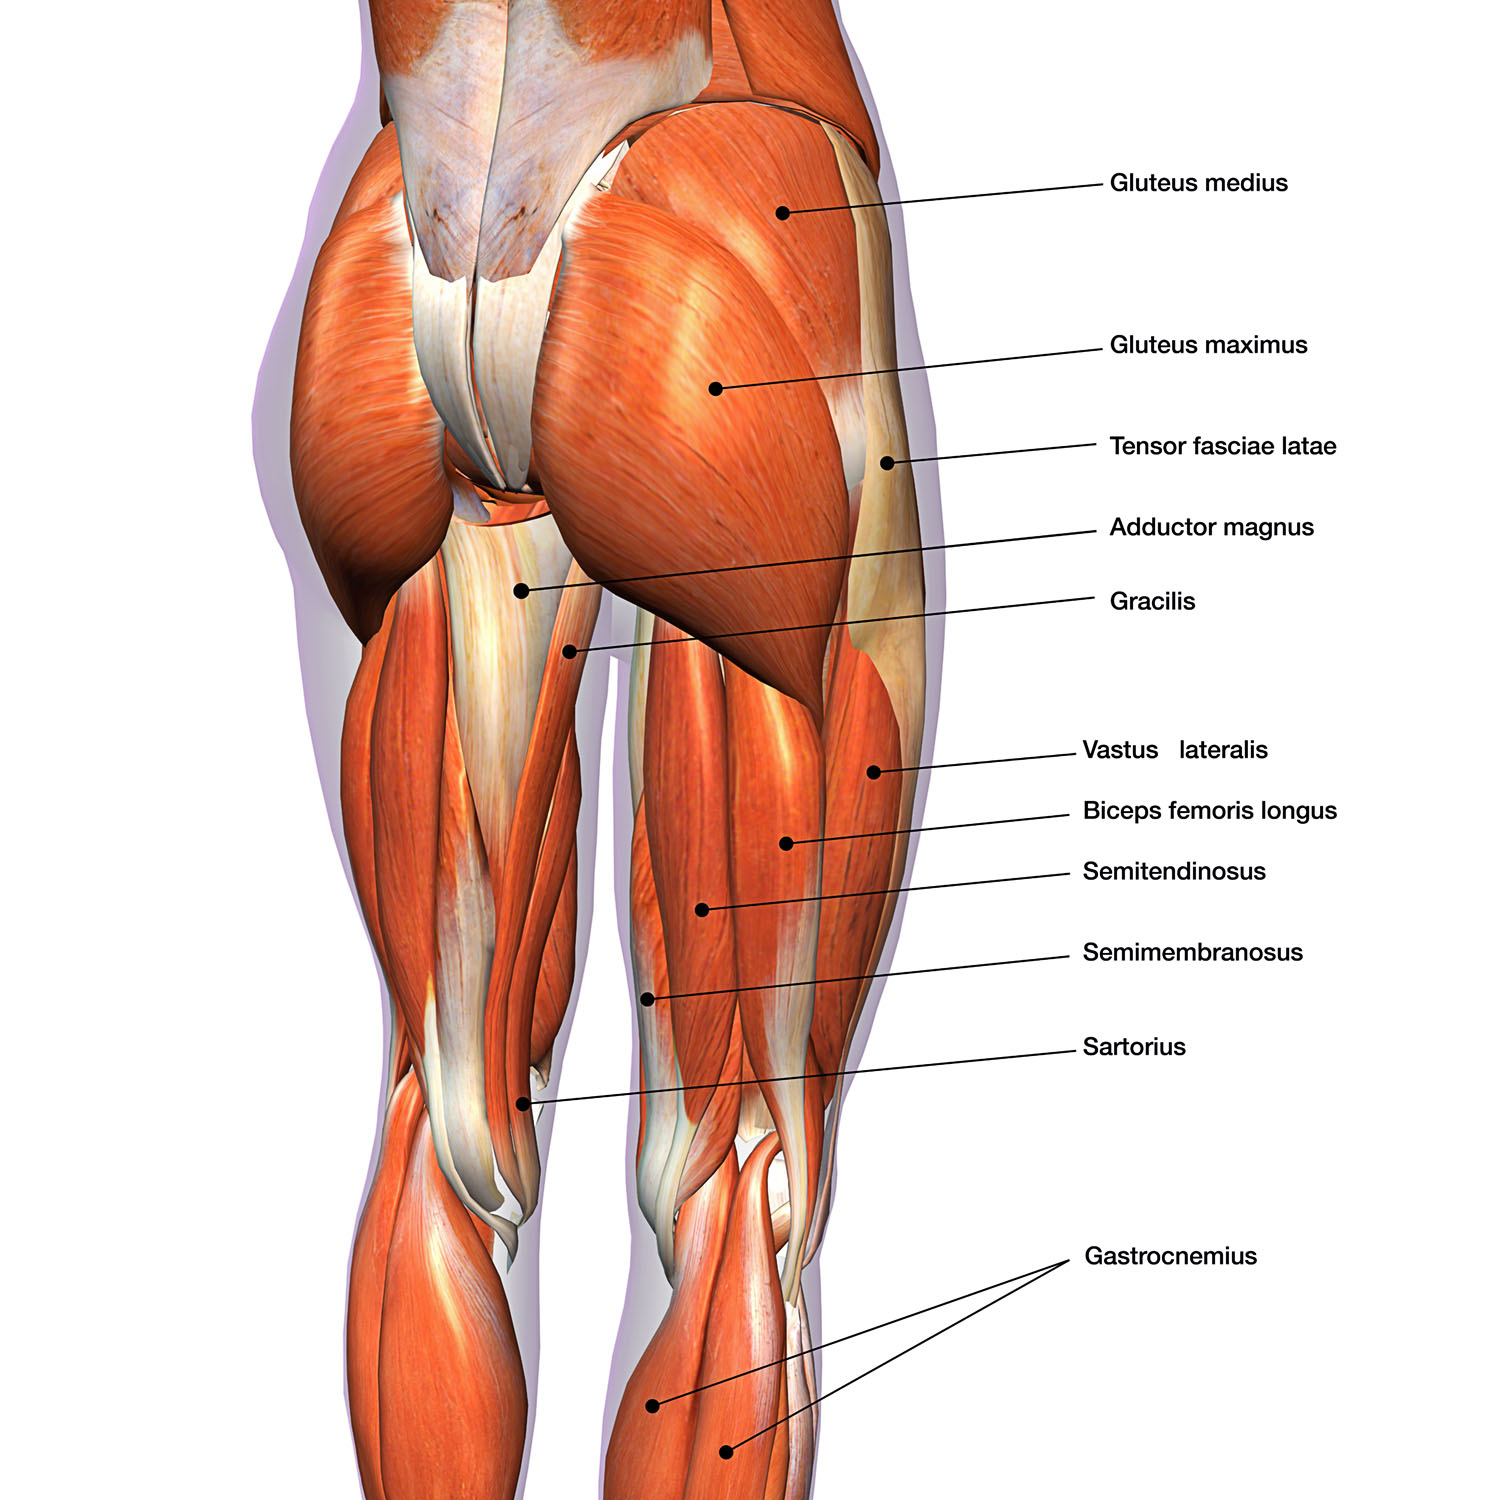 Glute, hip, and leg muscles drawn and labeled. Glute muscles used in lunges